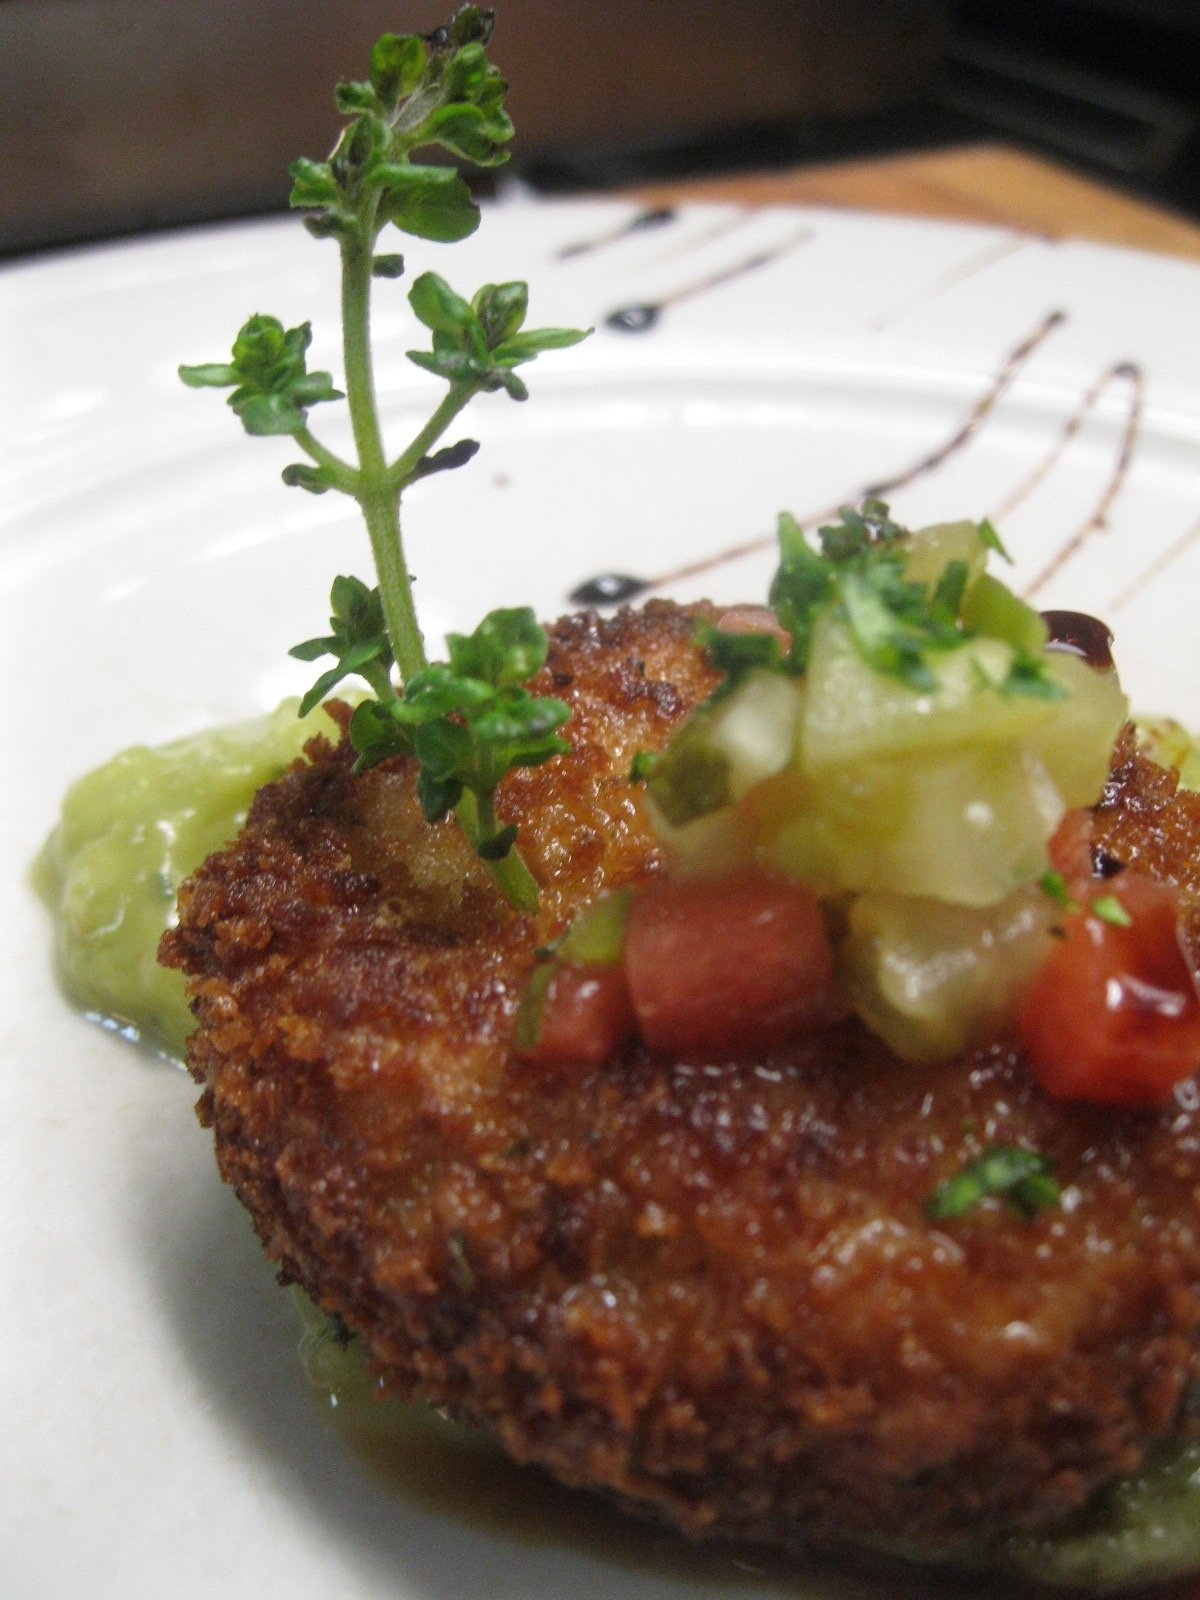 Maryland style crab cake with an heirloom tomato Jalapeno flecked concasse and avocado tartar sauce